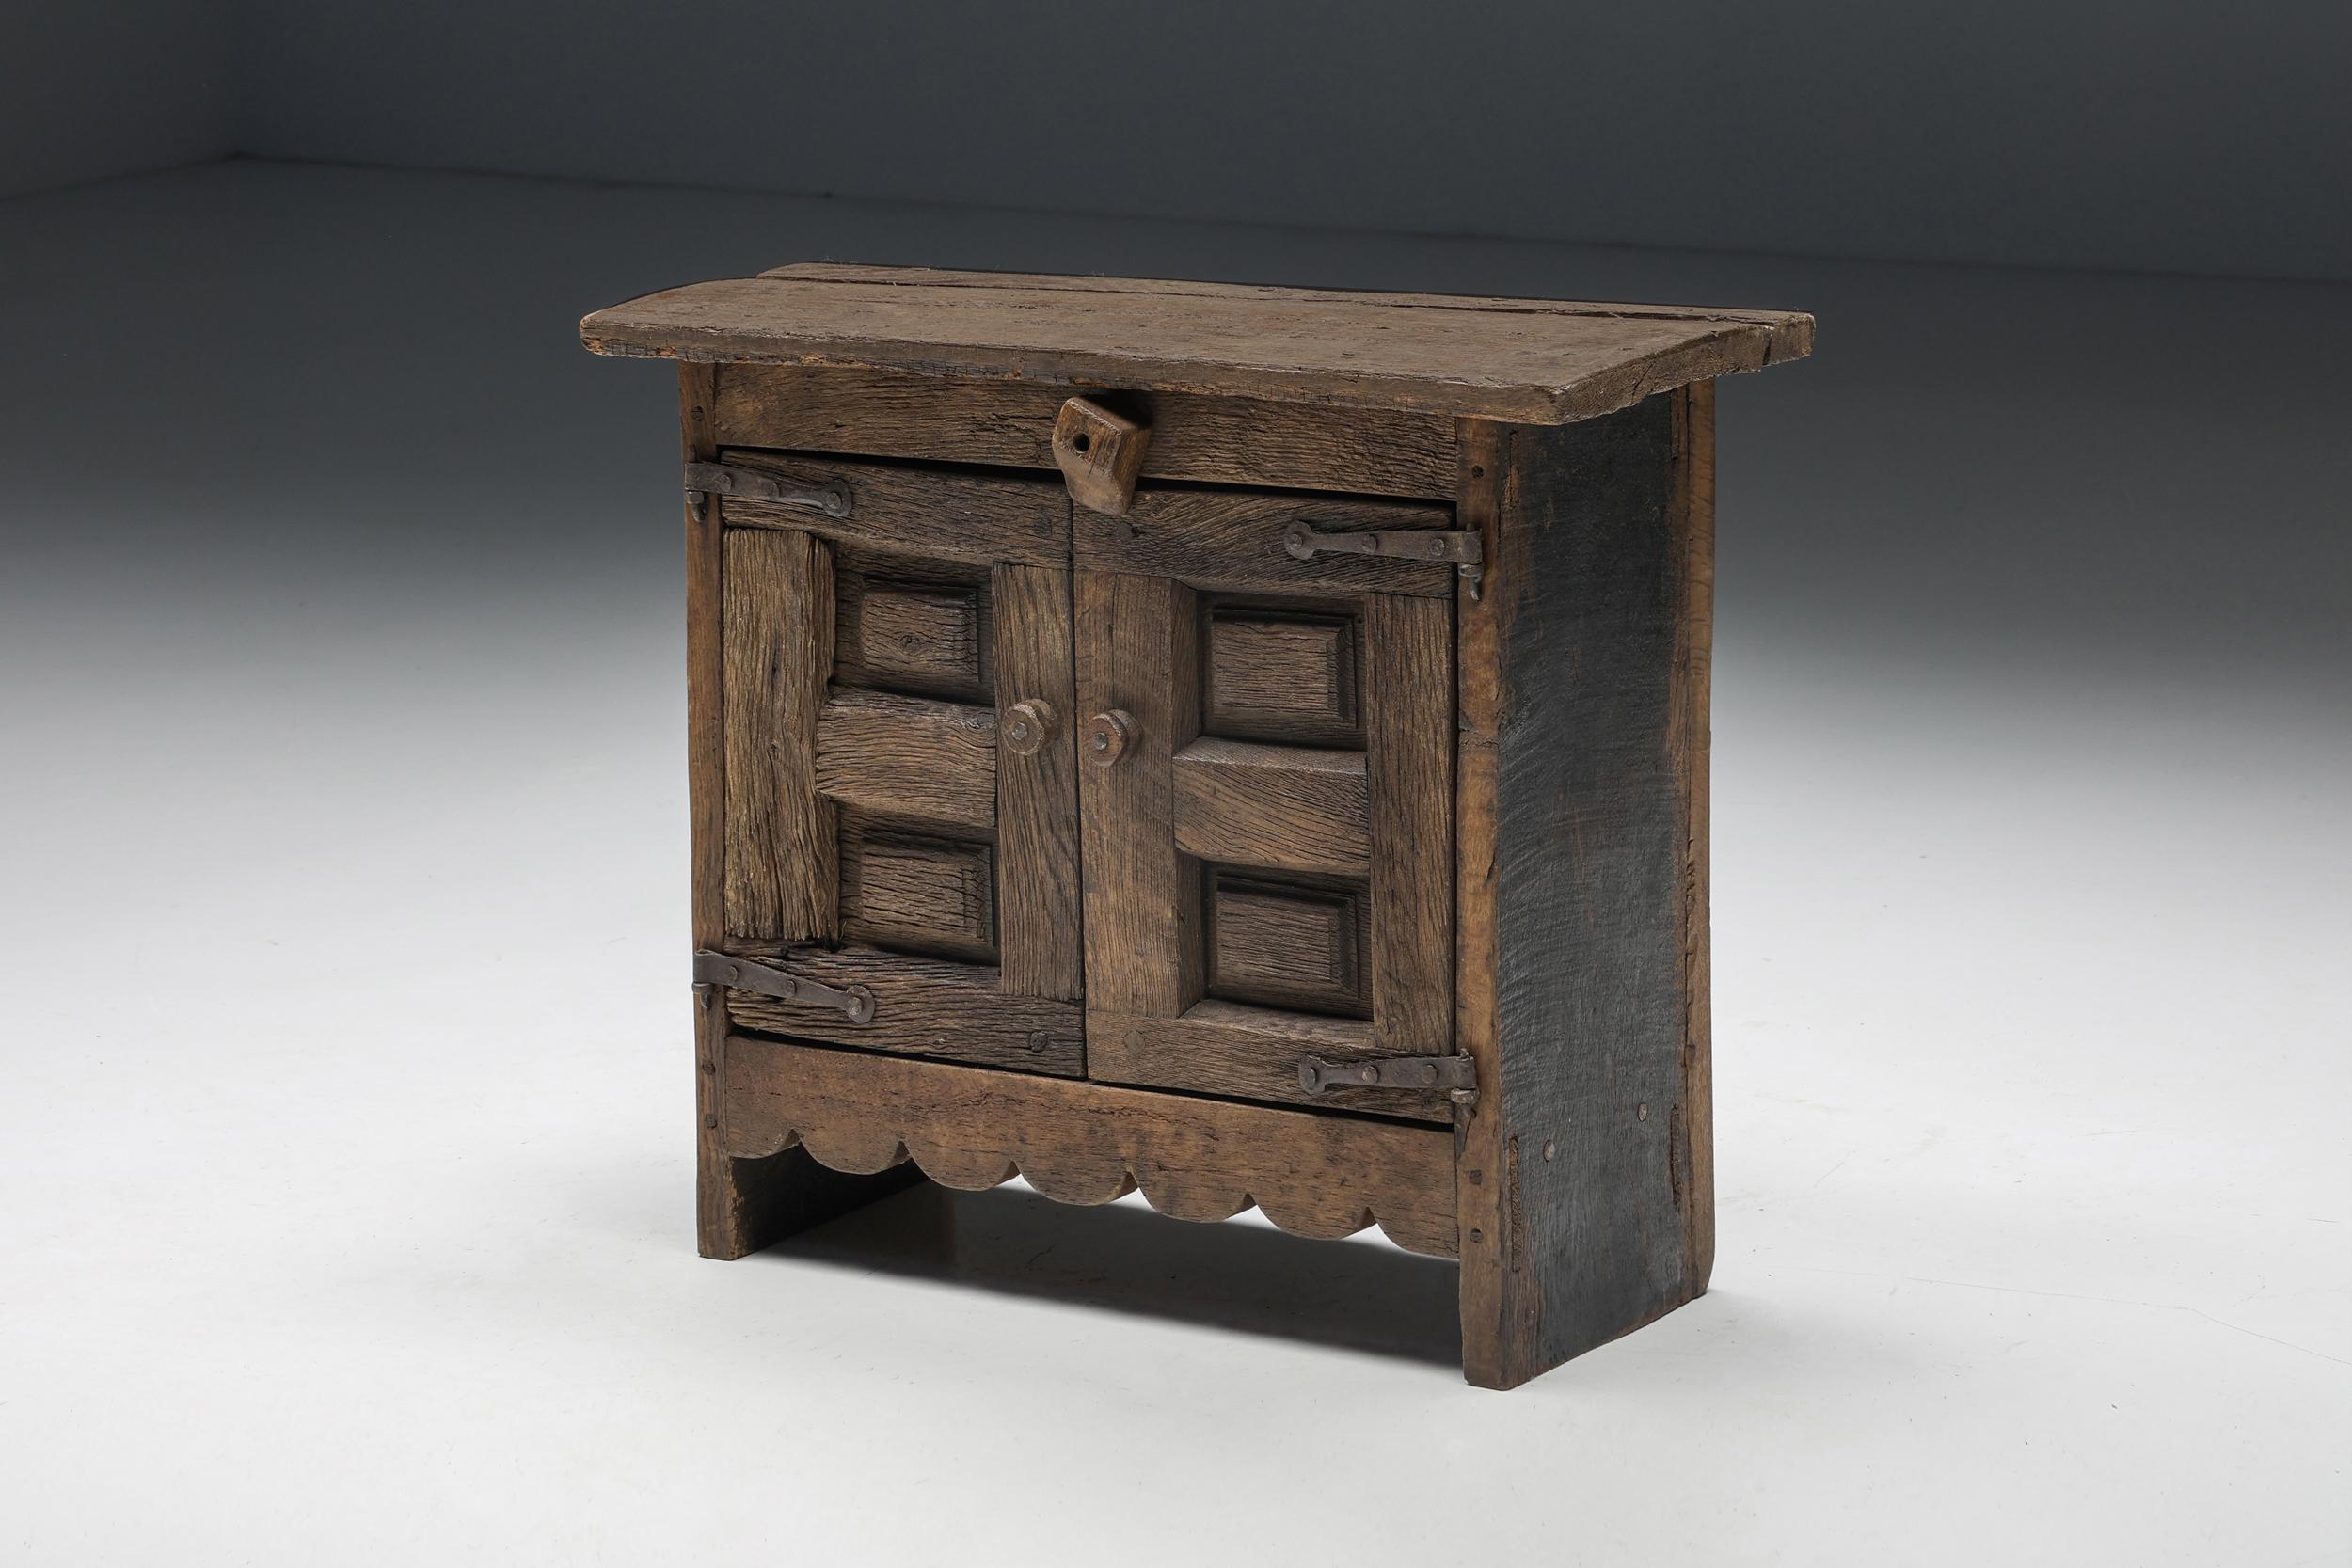 Robust; rustic; two doors; cabinet; storage; storage unit; wood; wabi sabi; france; 1940s; travail populaire; folk art; hand carved; organic; art populaire; 

Travail populaire folk art two-doors cabinet, made in France in the 1940s. A rustic and